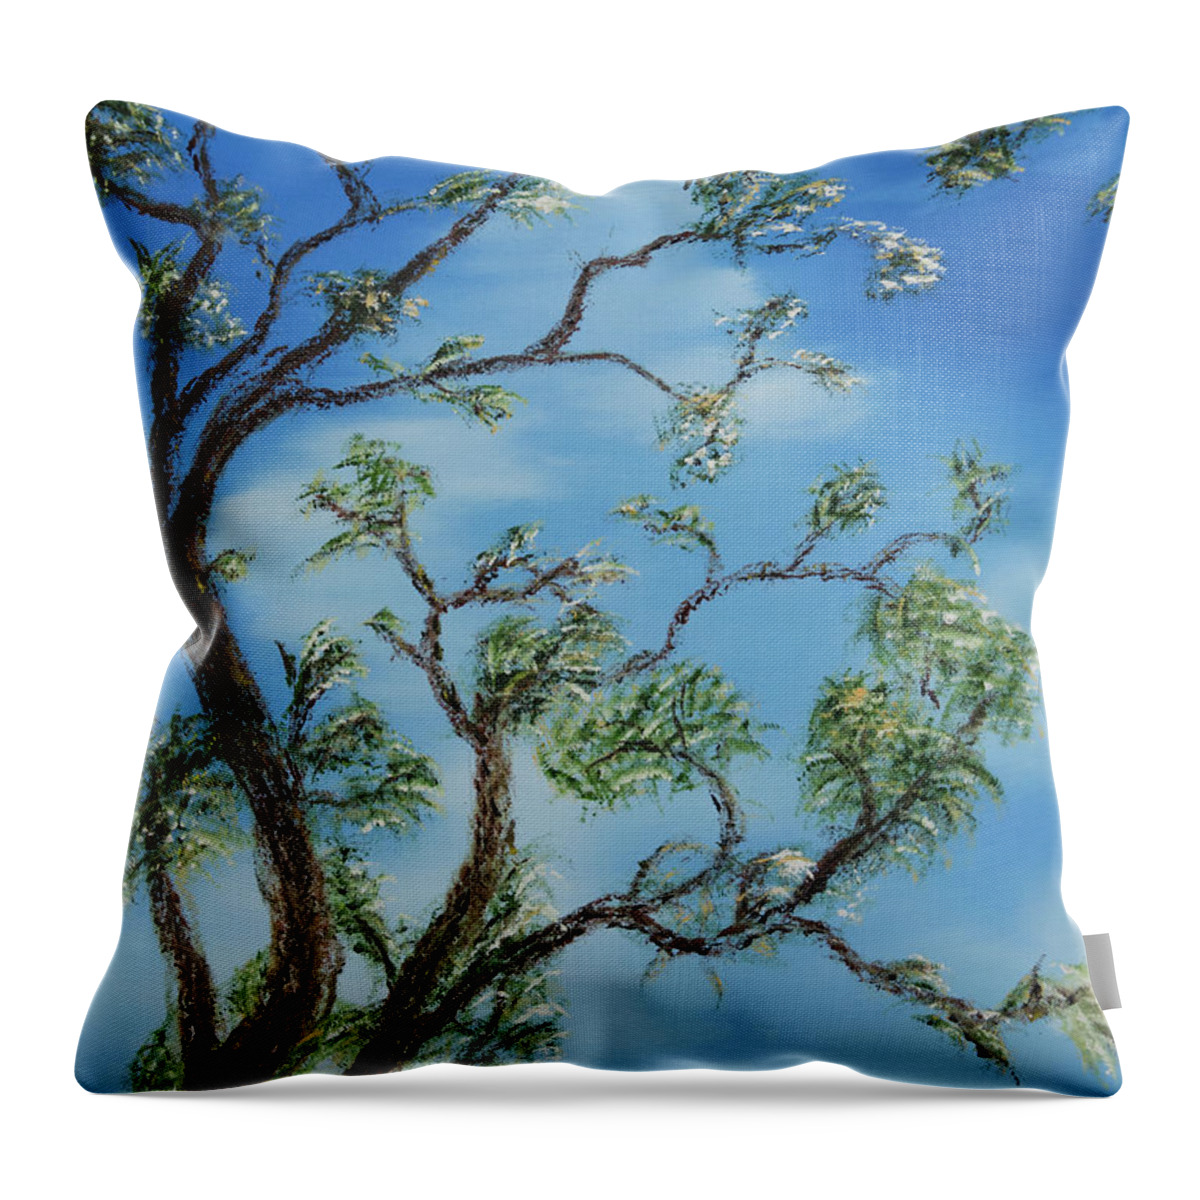 Stephen Daddona Throw Pillow featuring the painting Jim's Tree by Stephen Daddona